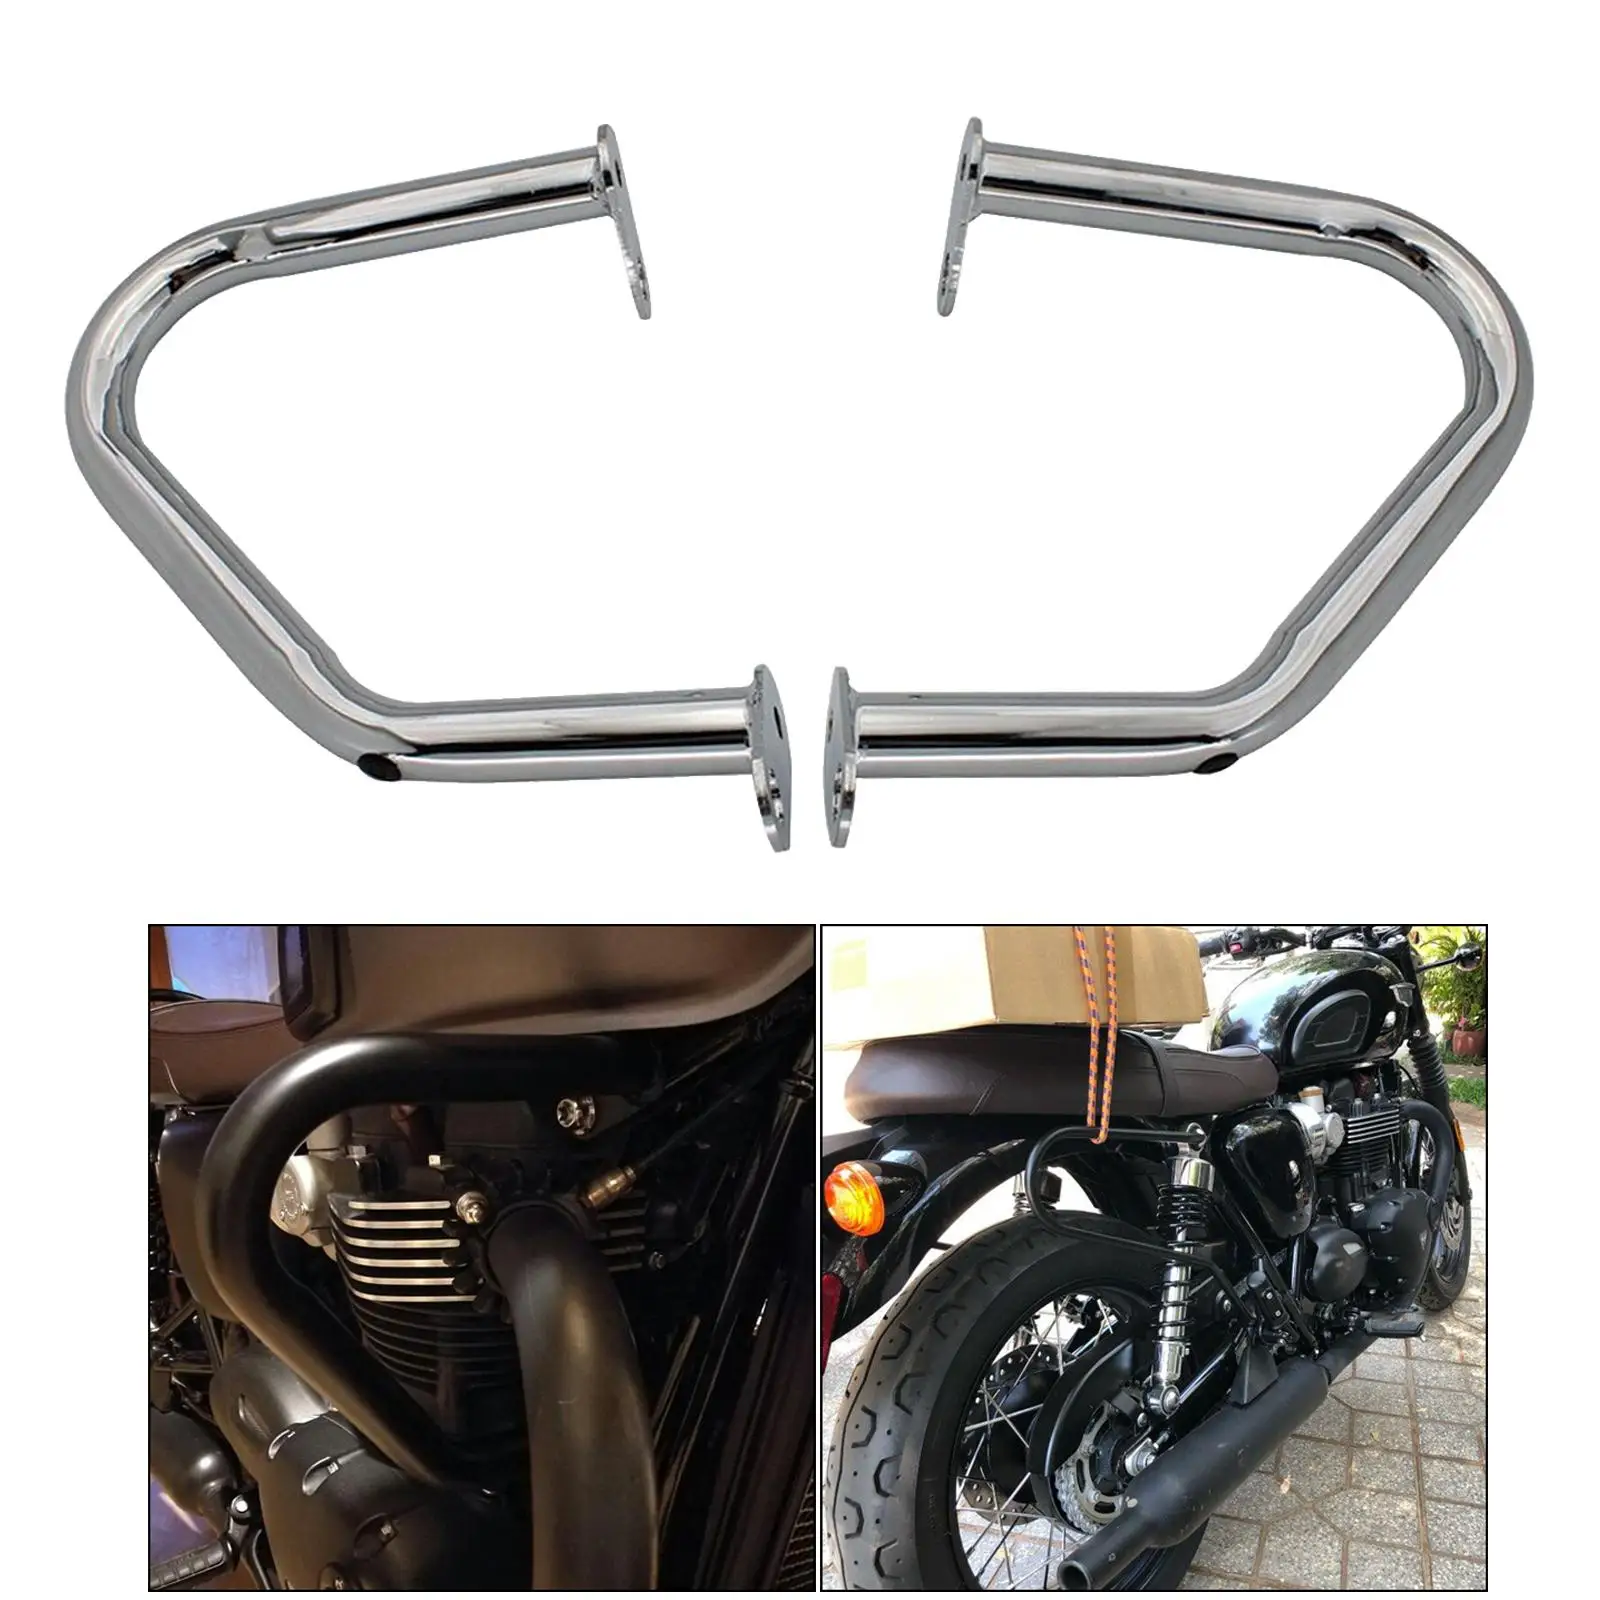 2 Pieces Chrome Motorcycle Engine Protection Crash Bars for  